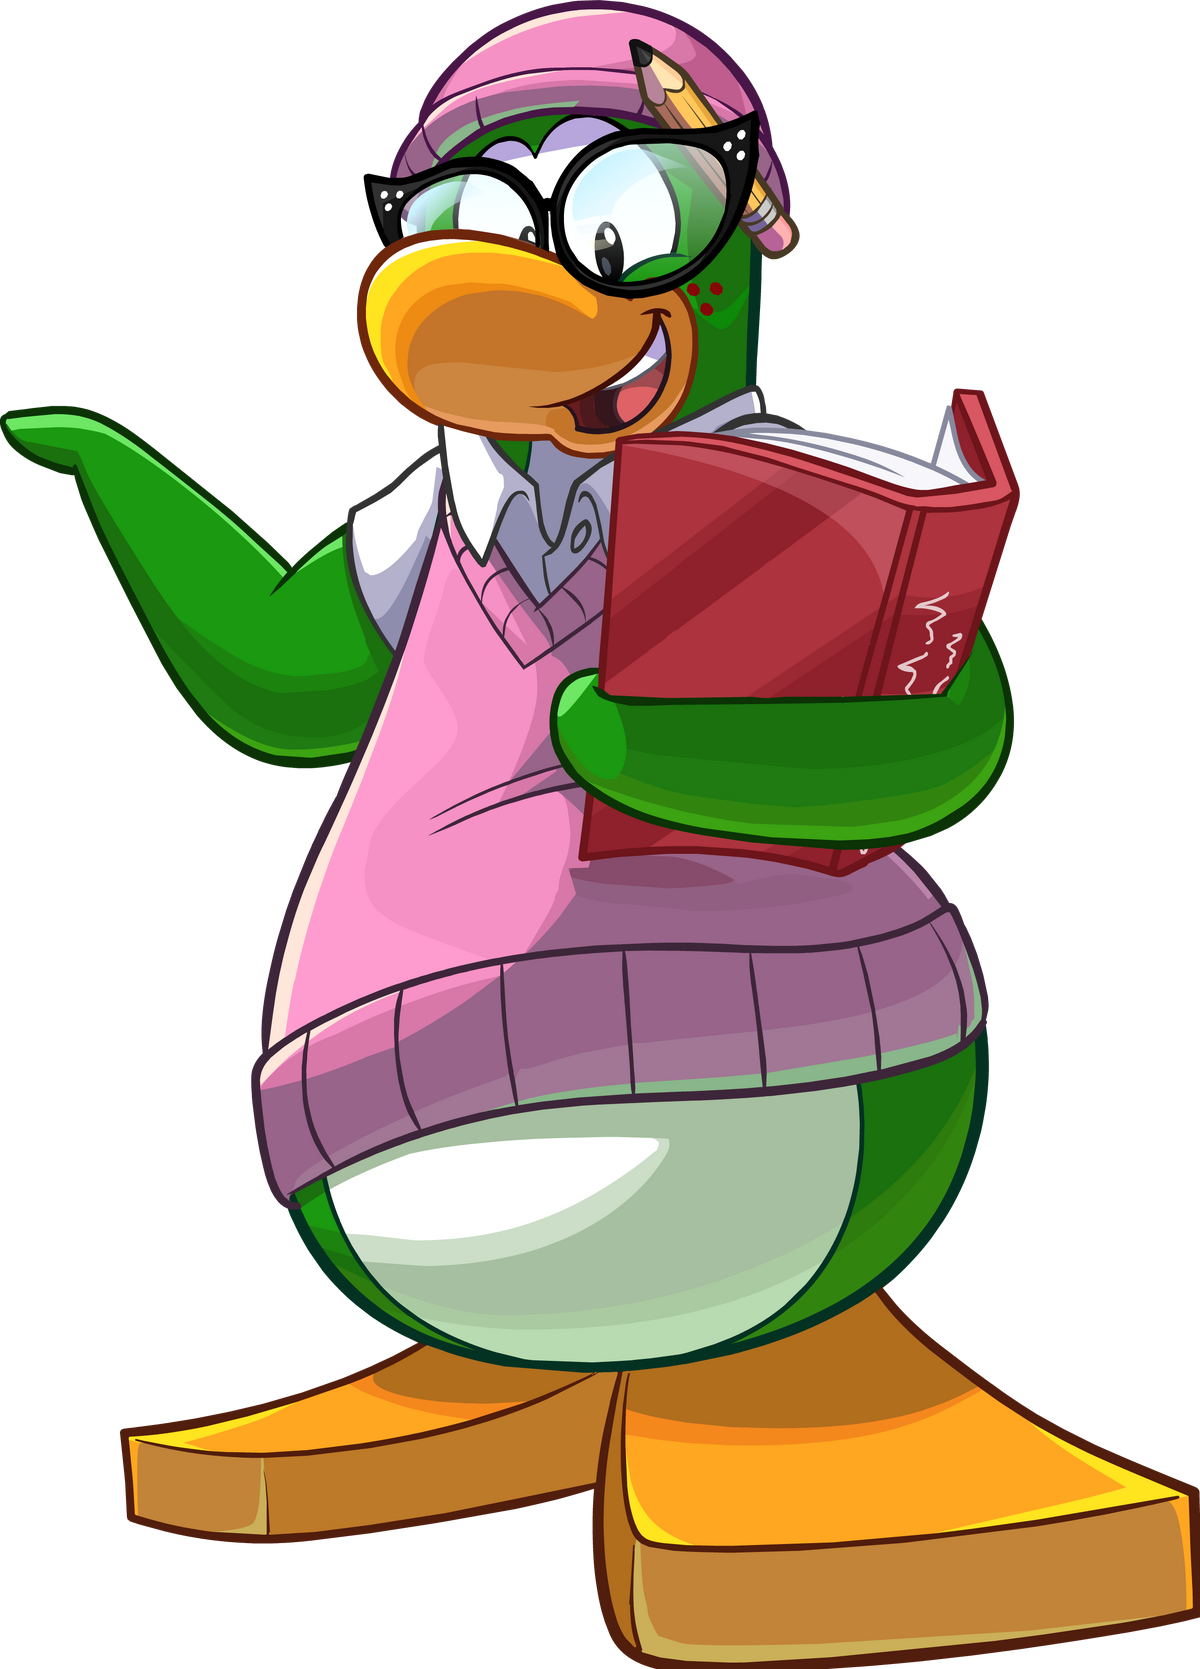 The Villager, Club Penguin Wiki